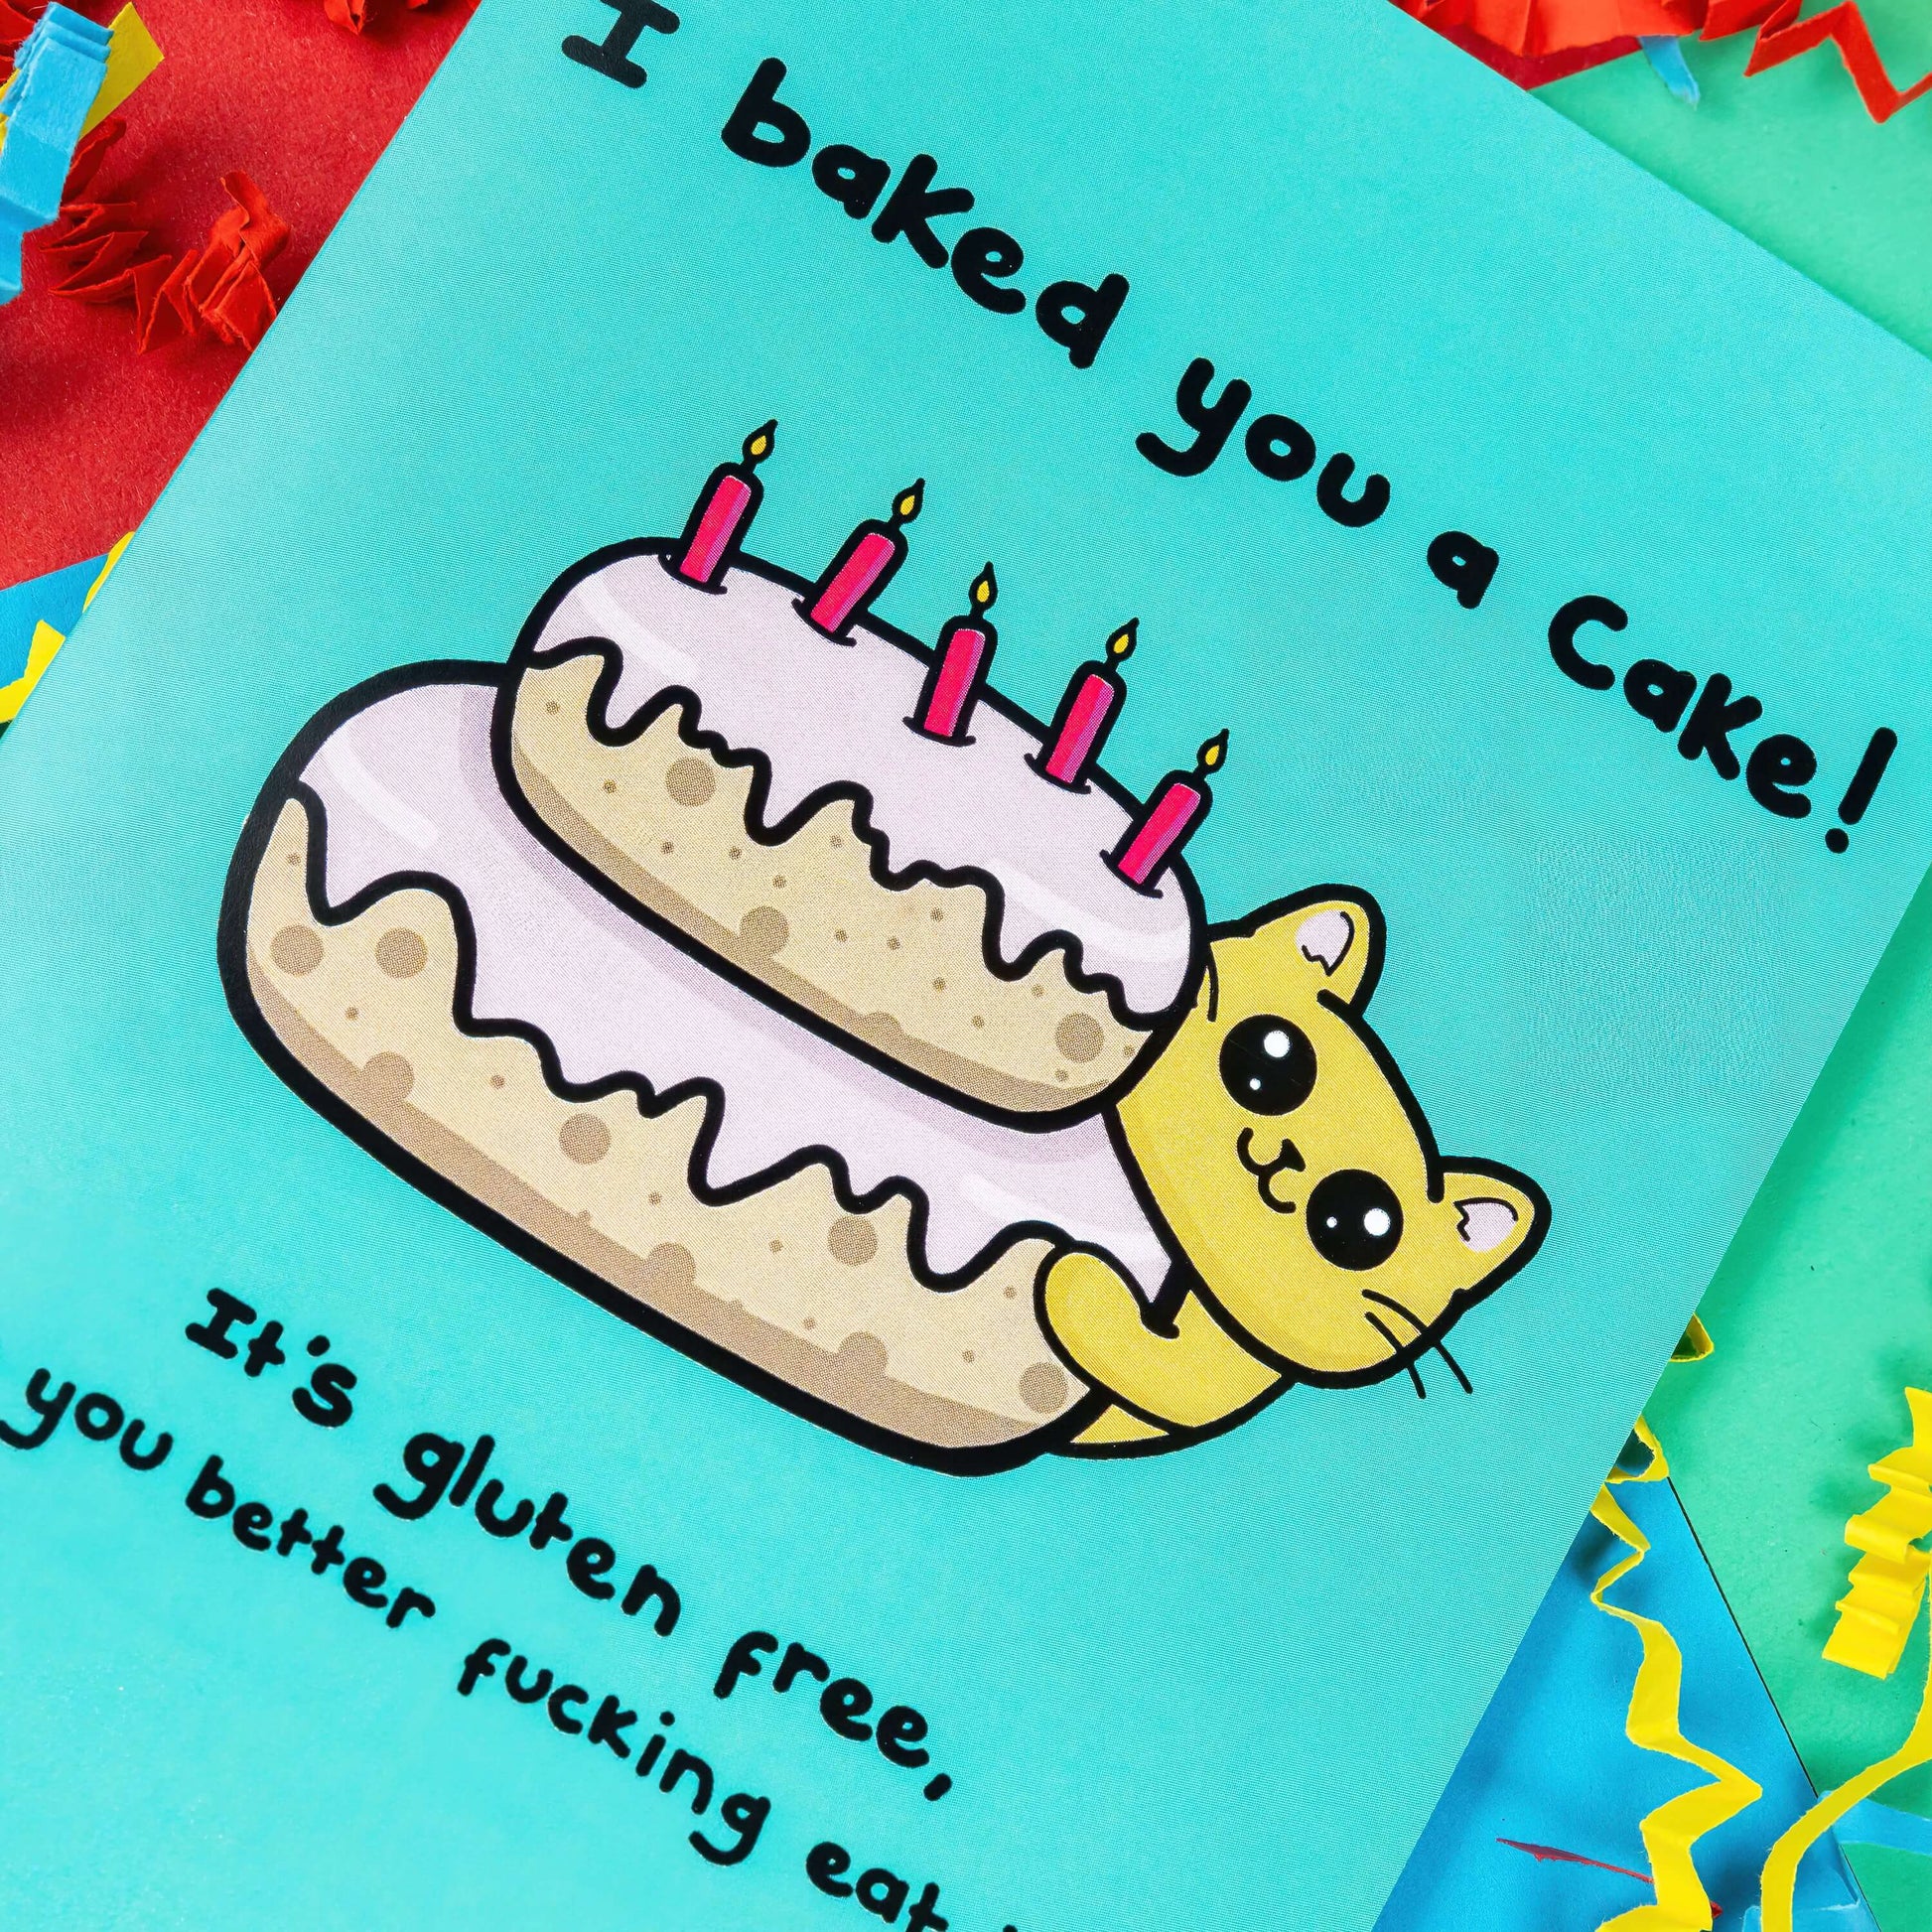 A turquoise blue card that has a drawing of a yellow cat poking around a pink layered cake with candles in the top. Text on the card says I baked you a cake! It's gluten free, so you better fucking eat it! The a6 cat themed birthday card is on a blue, red and green background with red, yellow and blue crinkle card confetti. 